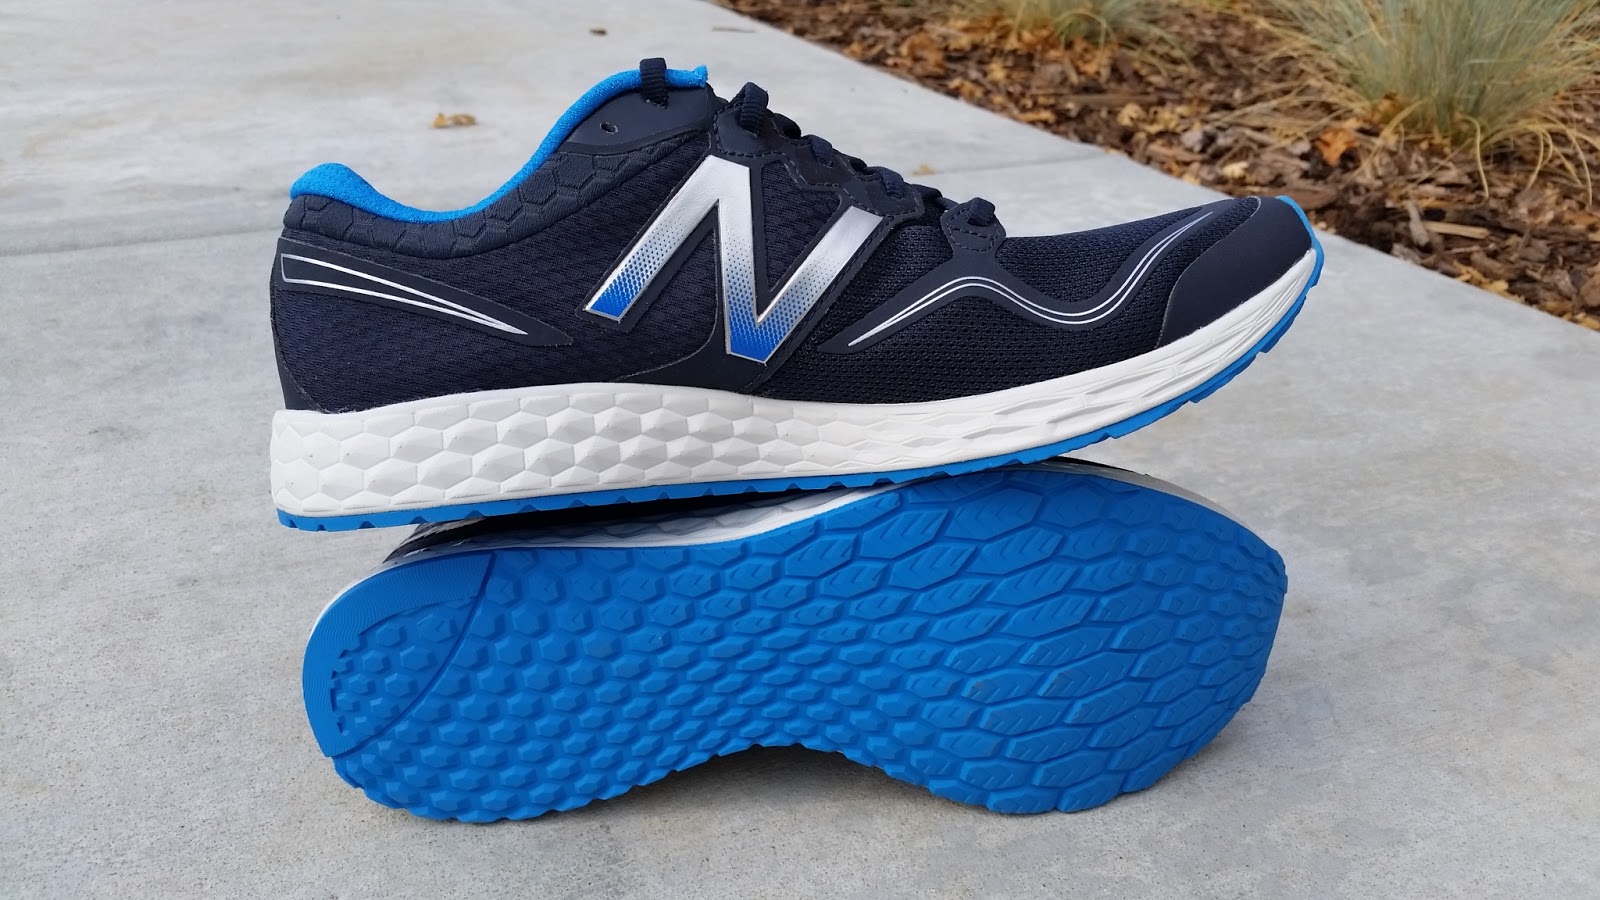 Running Without Injuries: New Balance Fresh Foam Zante Review